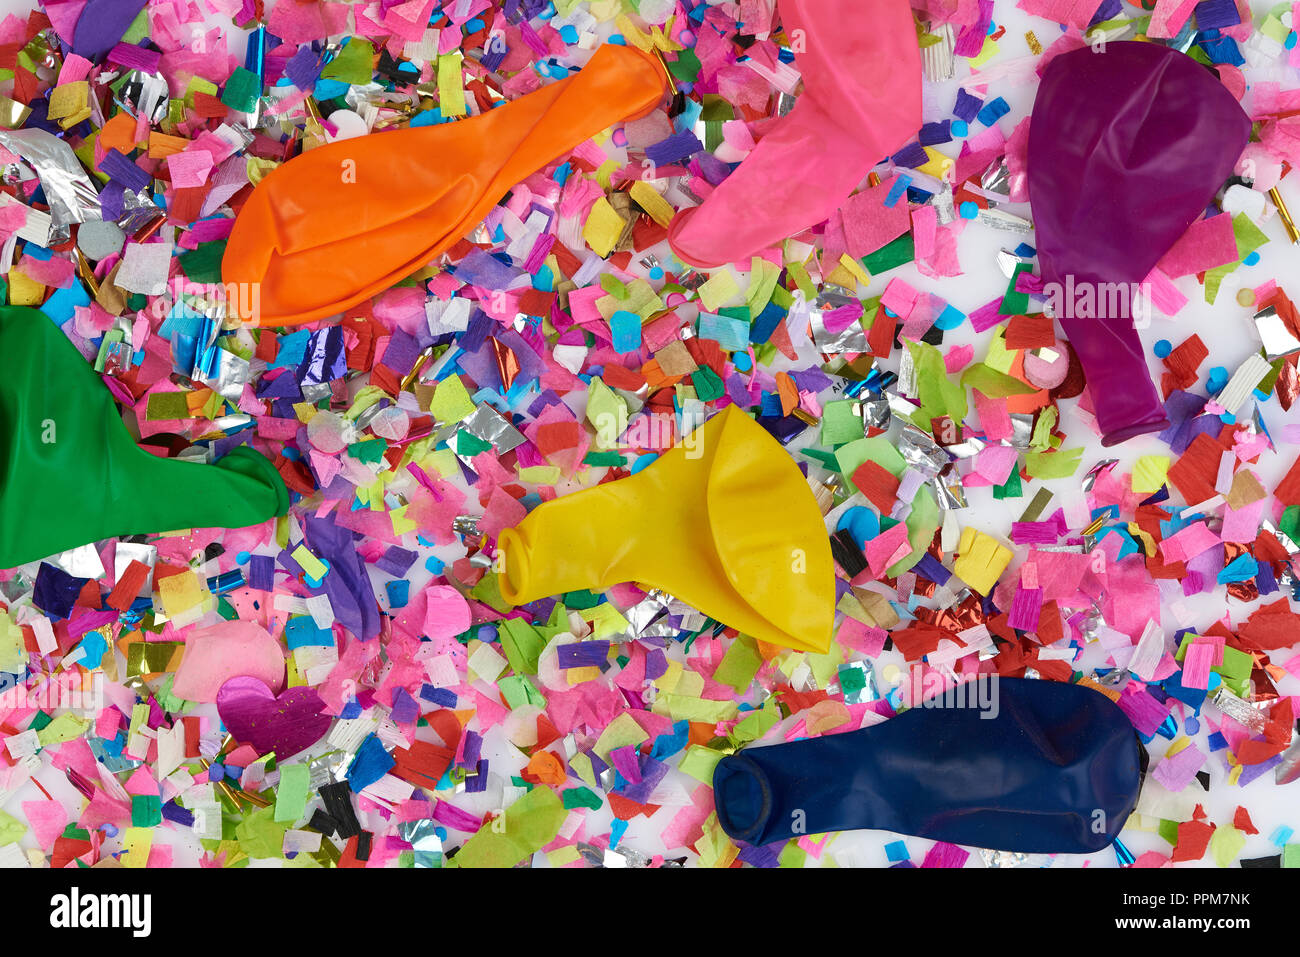 Finished party theme. Empty  balloons lay on colorful confetti background Stock Photo